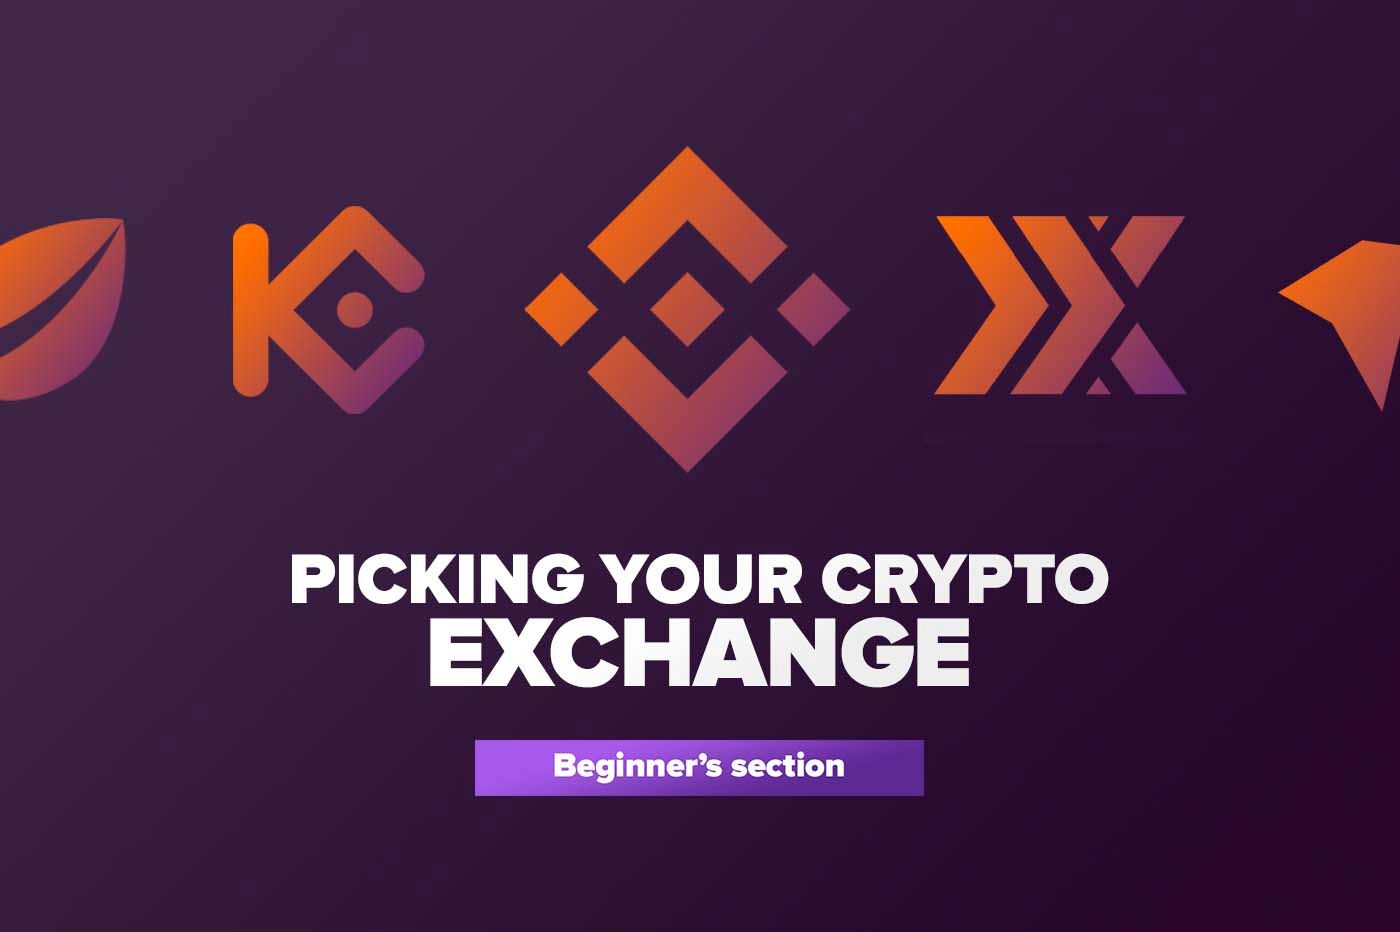 Article Picking your Crypto Exchange